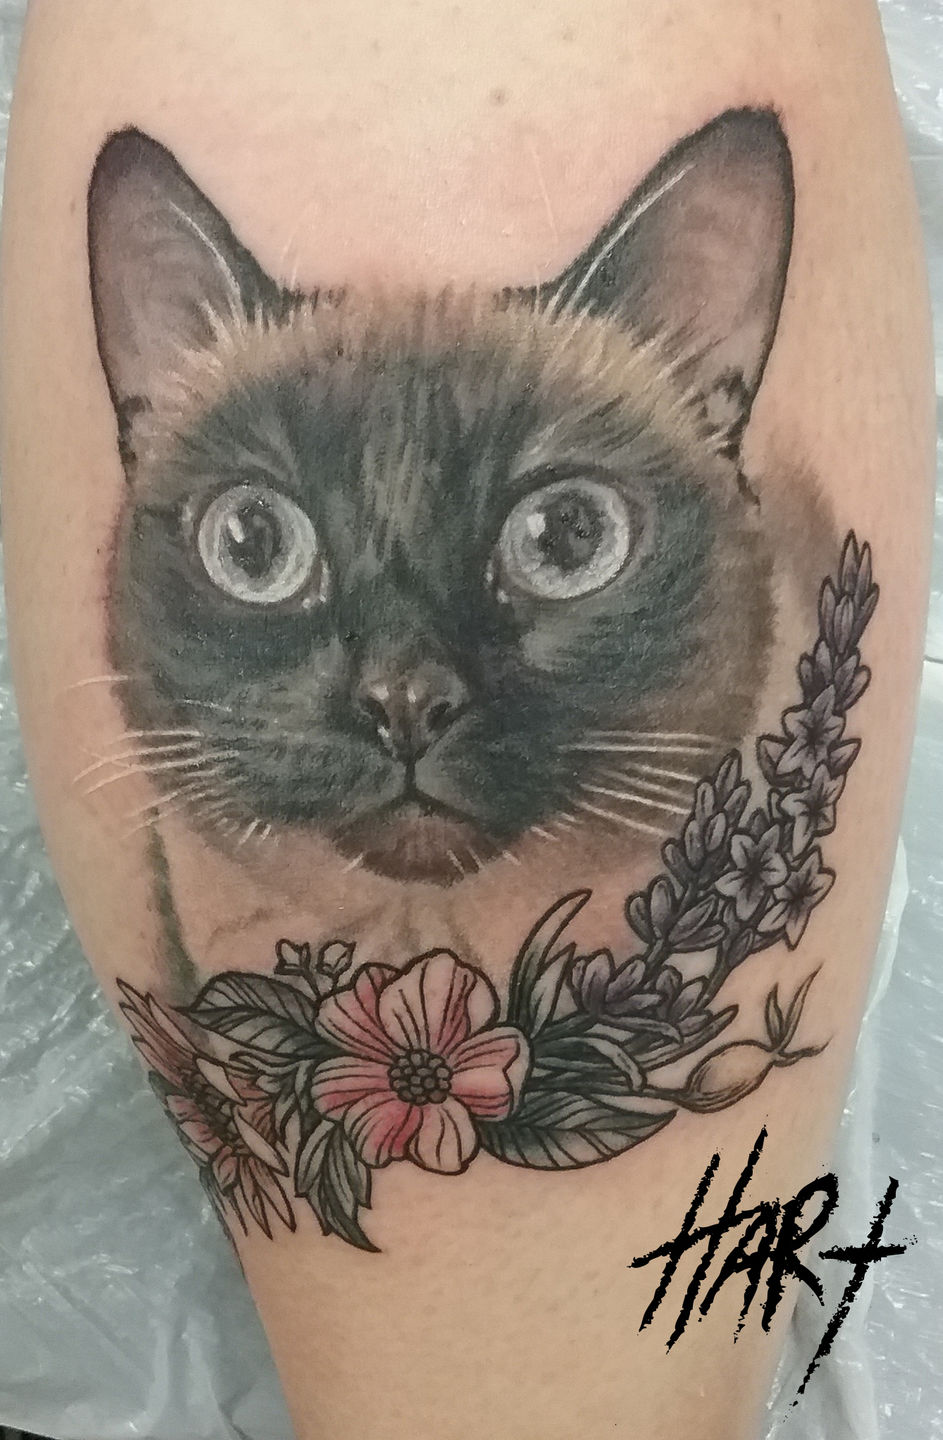 Cat playing with a flower wreath tattoo on the right